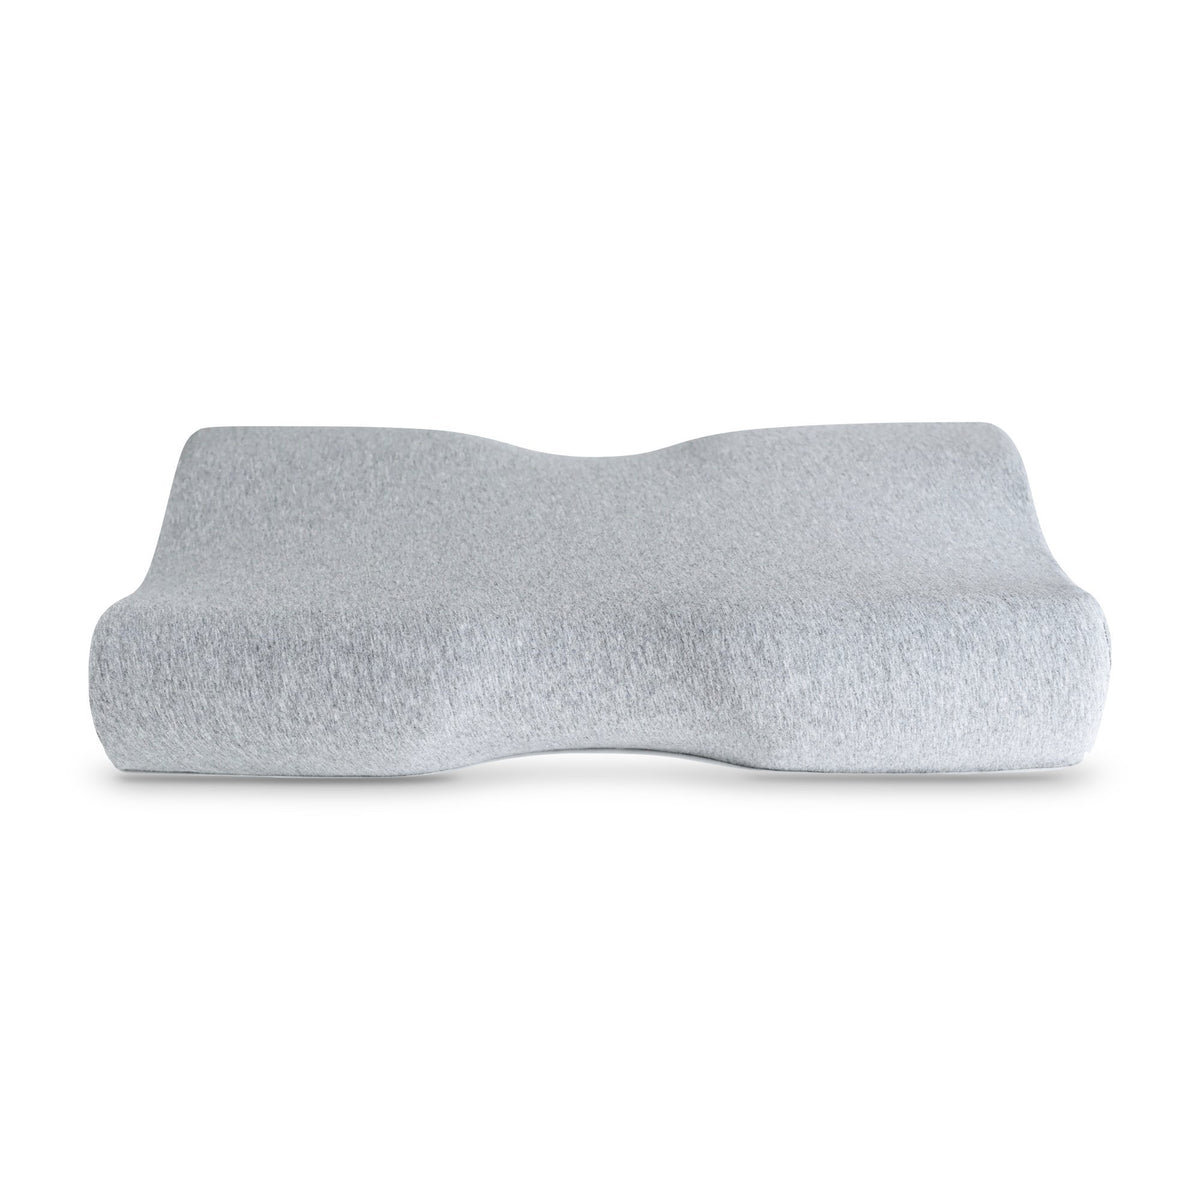 Cushion Lab Neck Roll Pillow